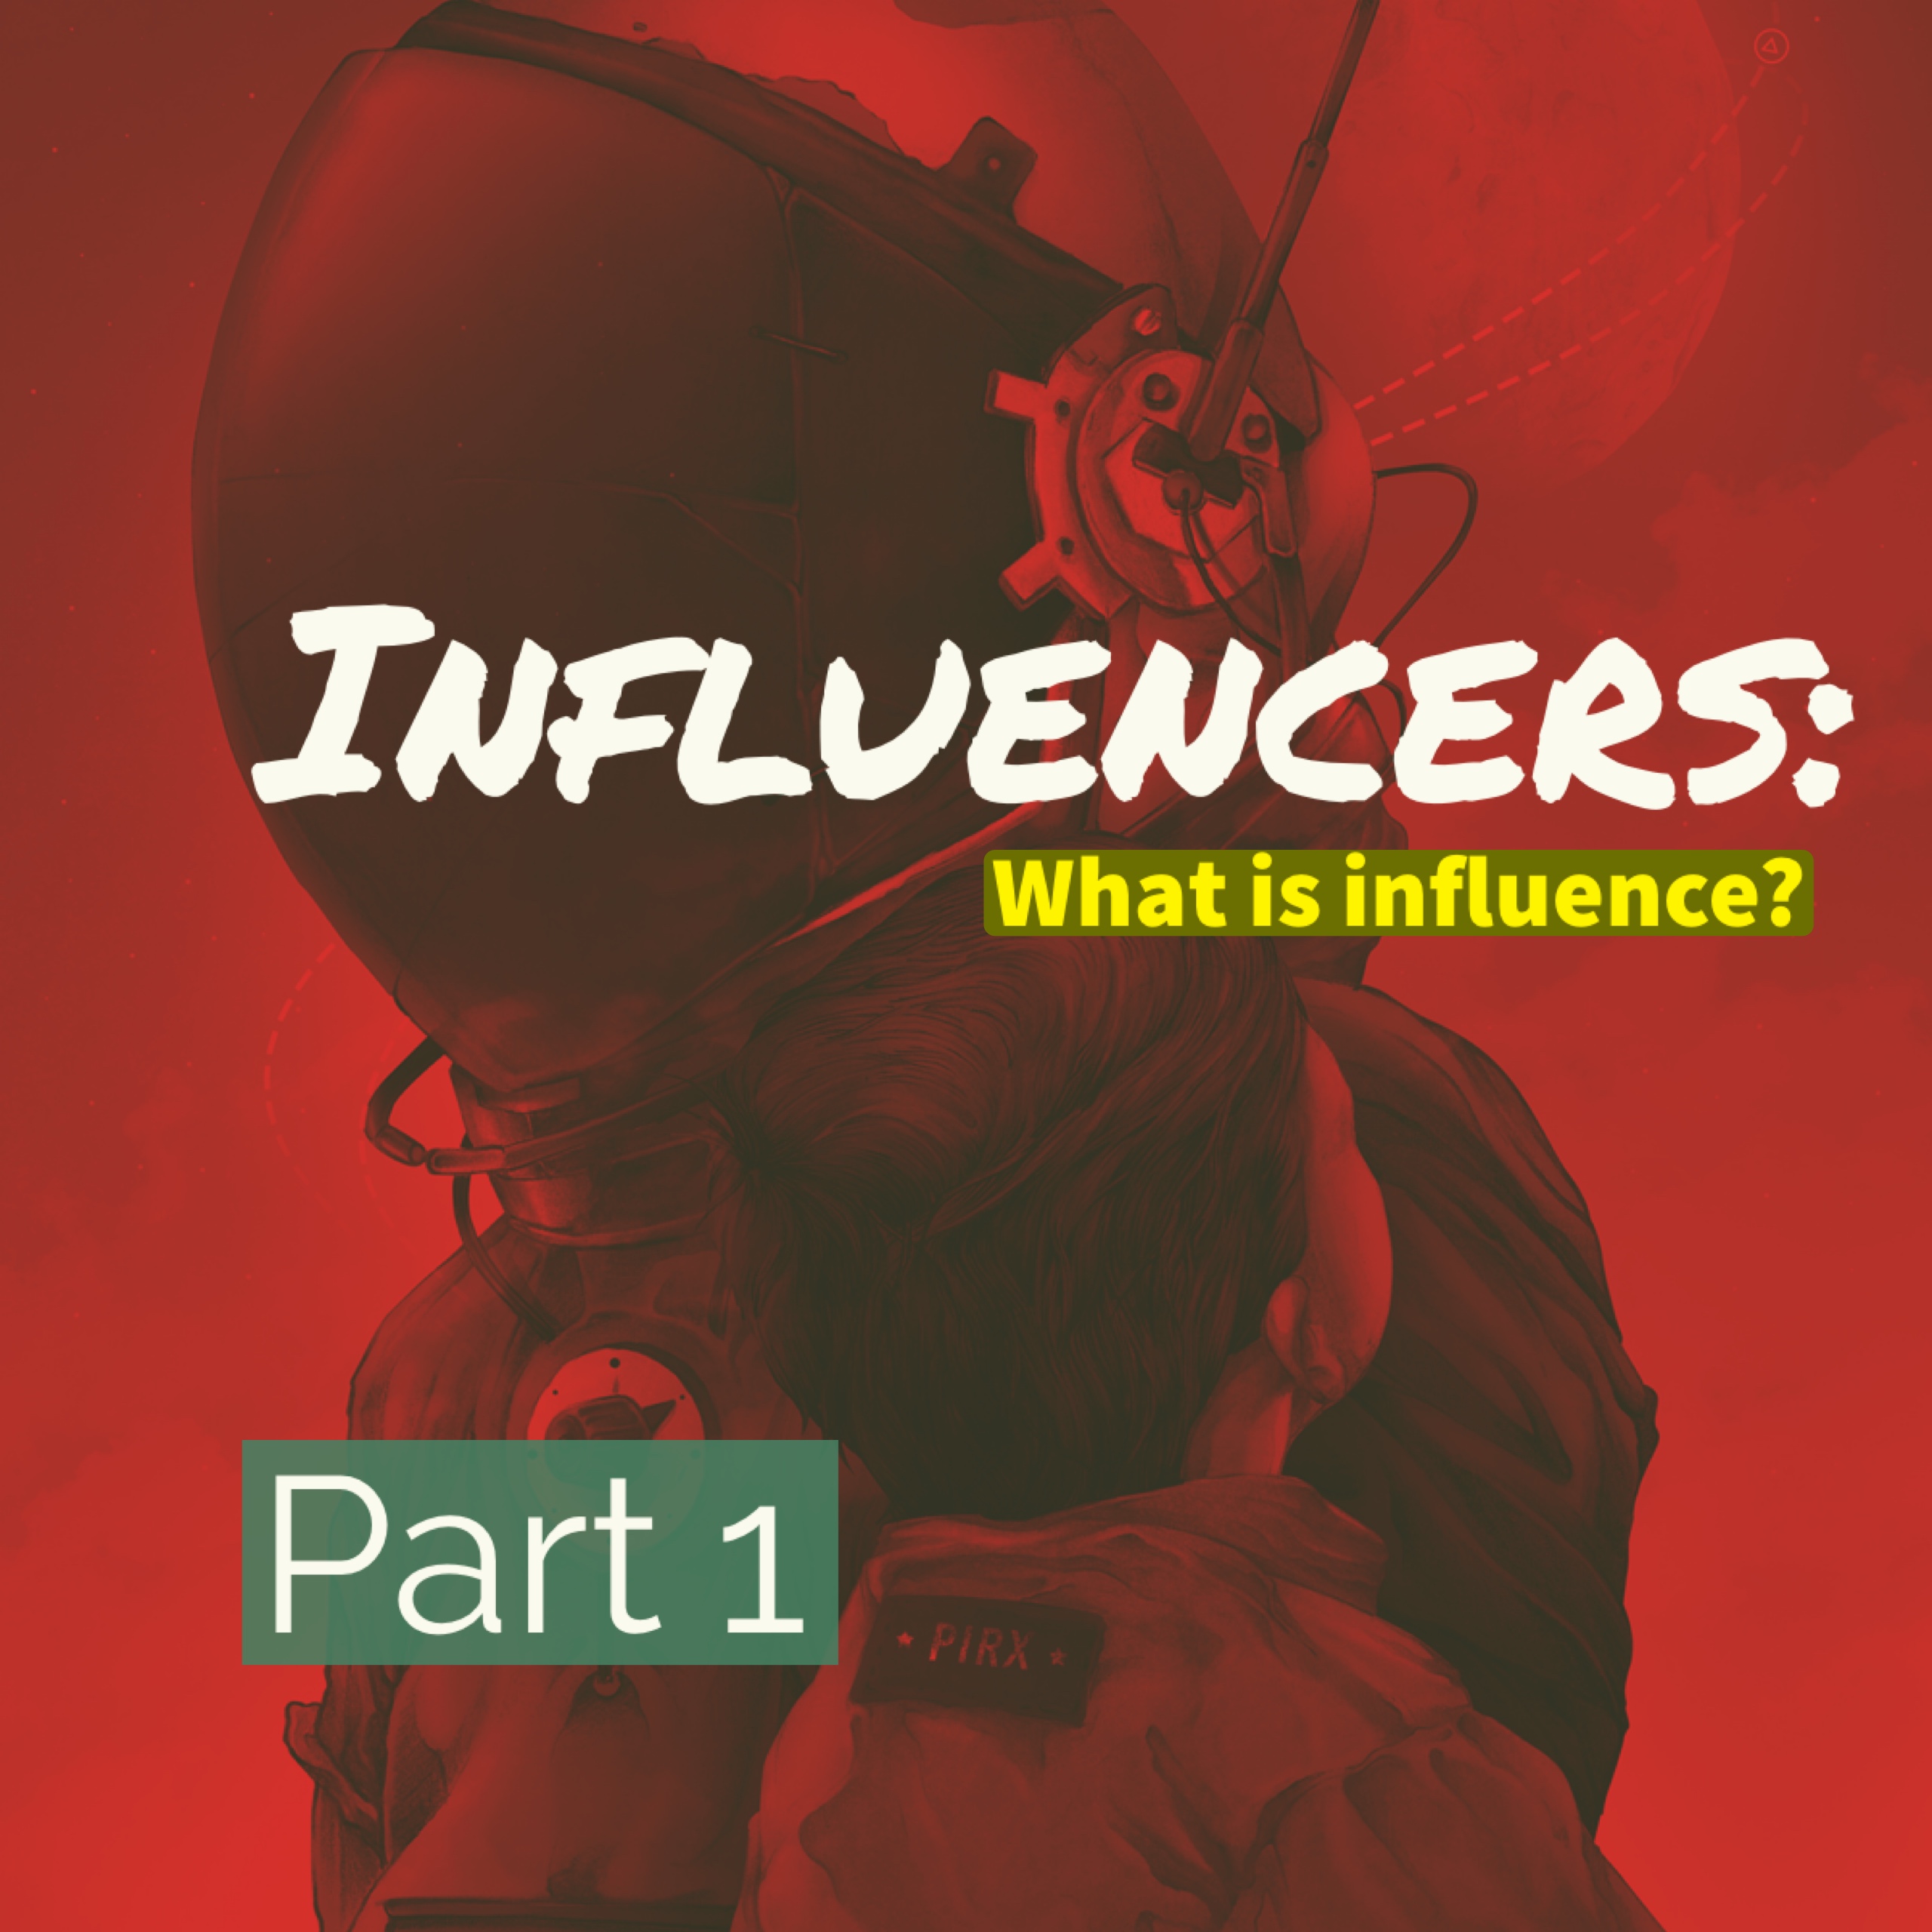 What Is Influence?